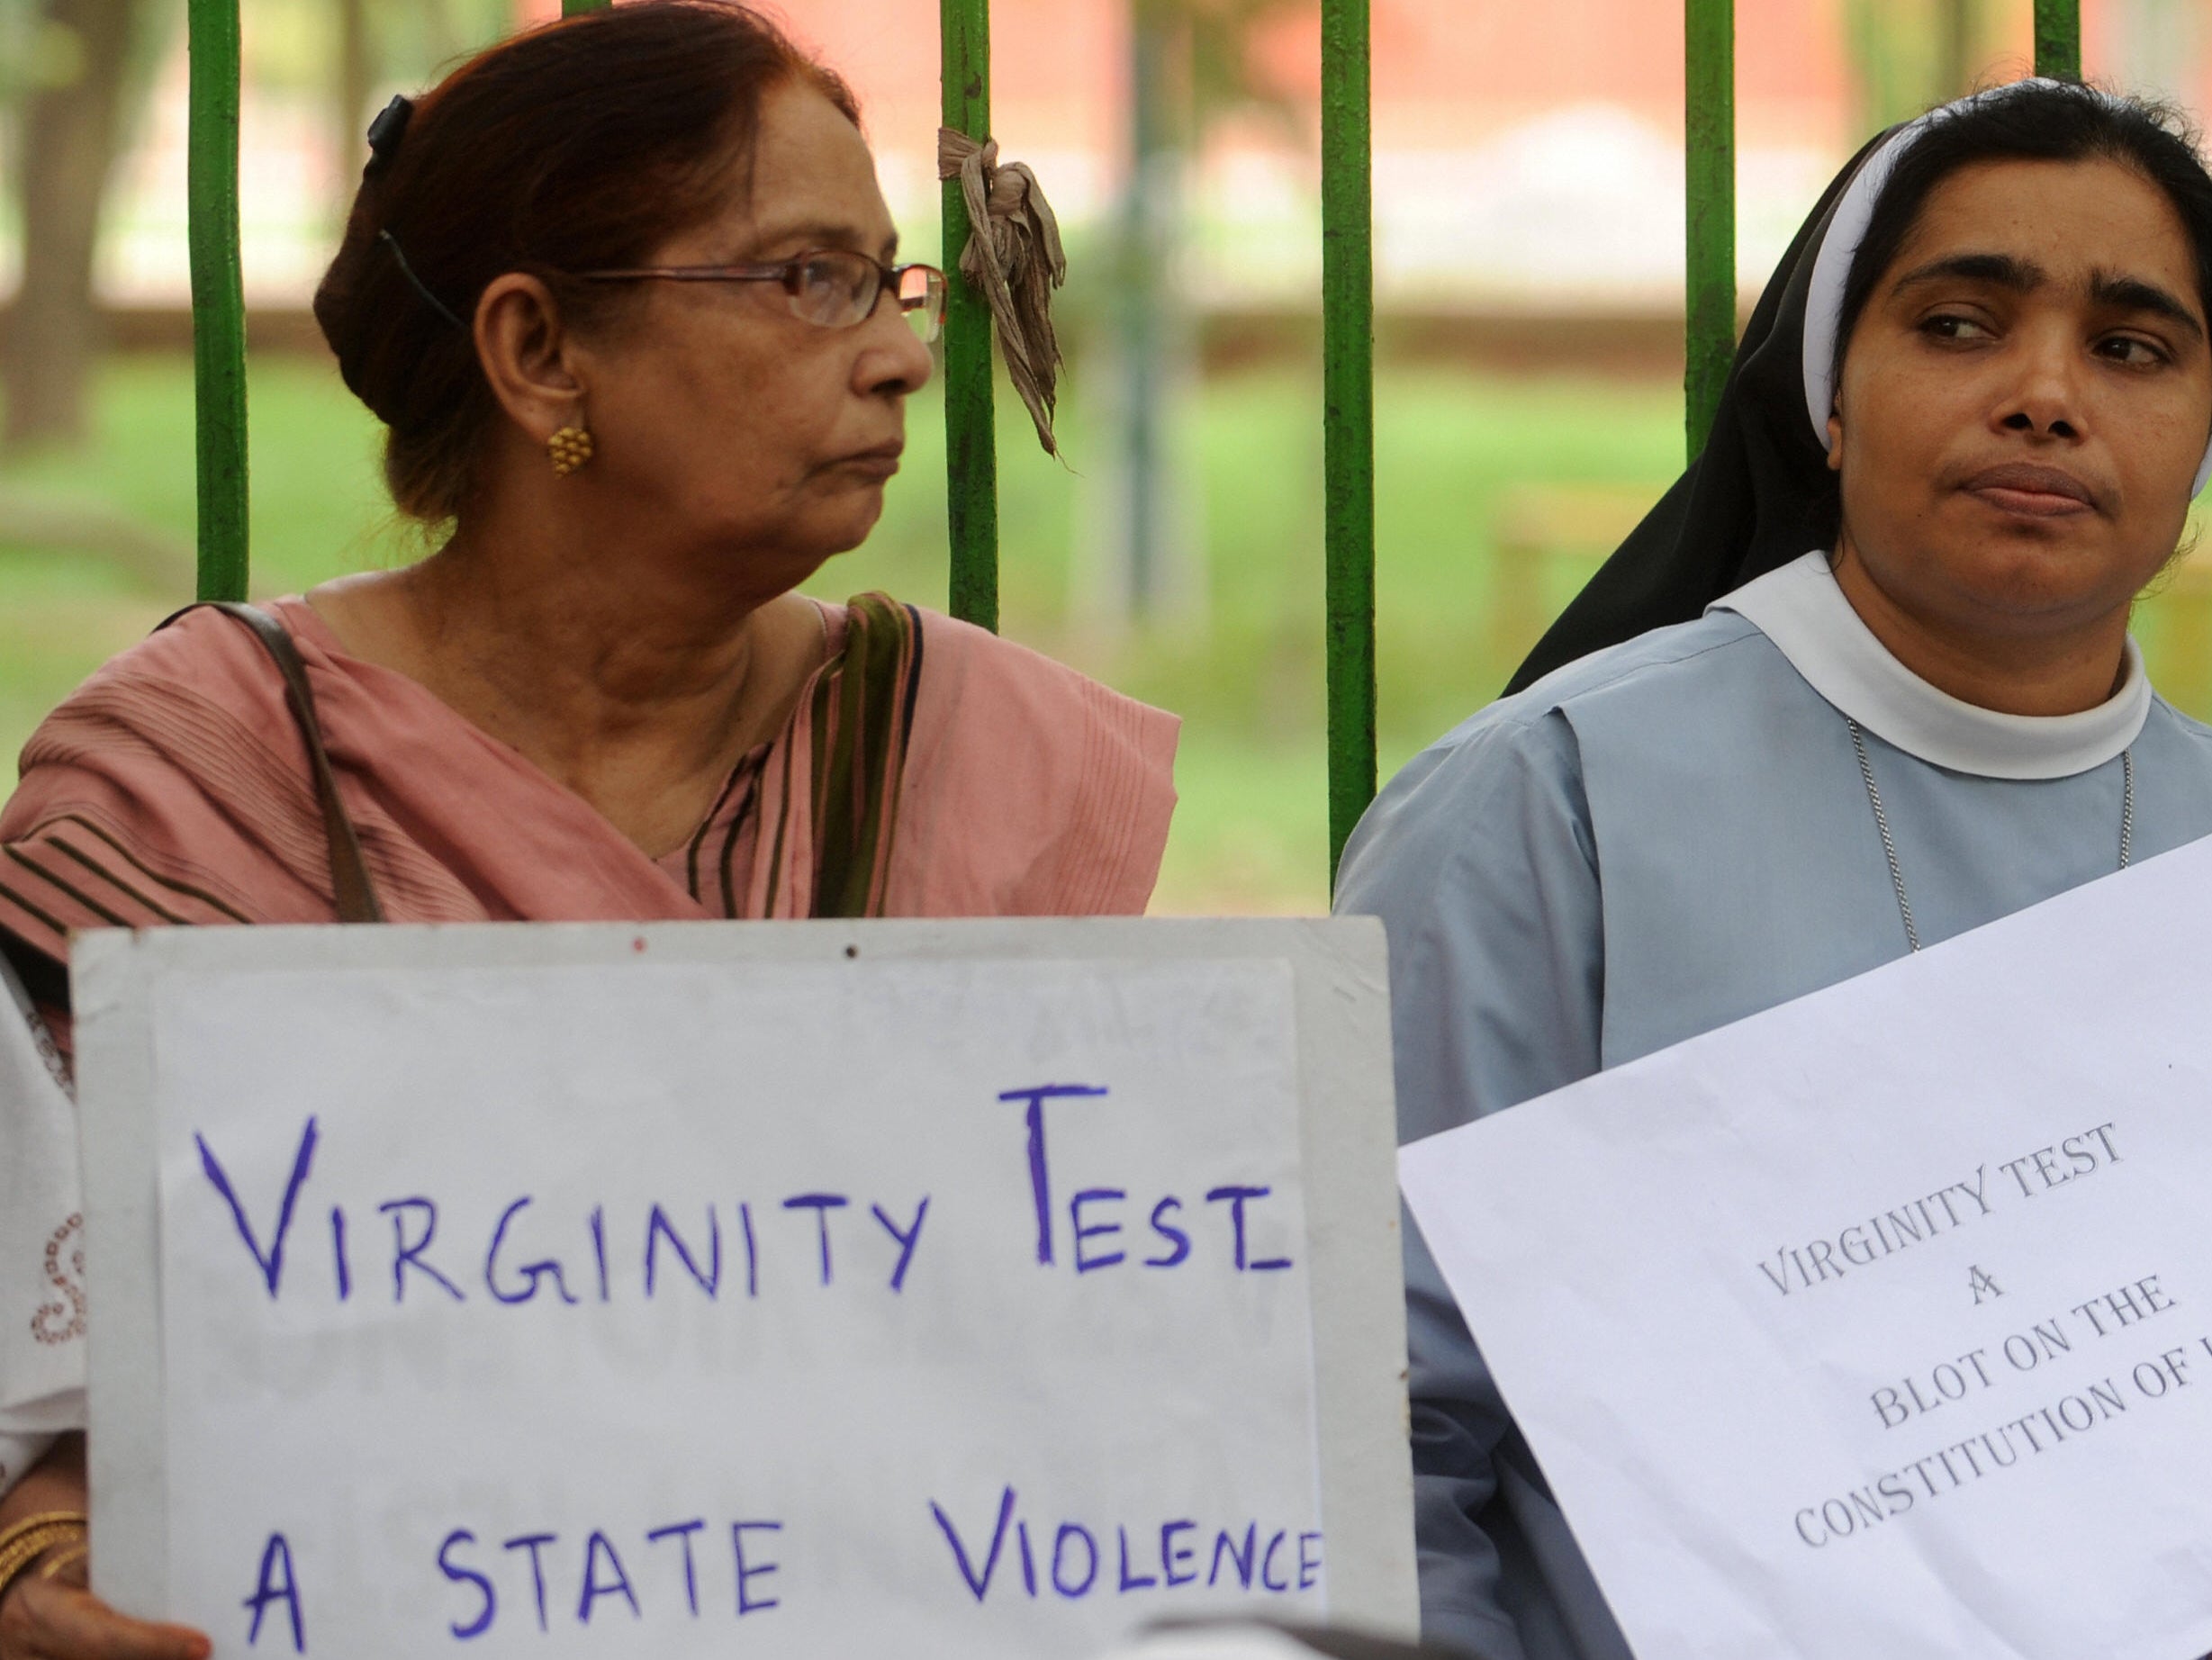 File image: Activists hold placard to demand ban on virginity test